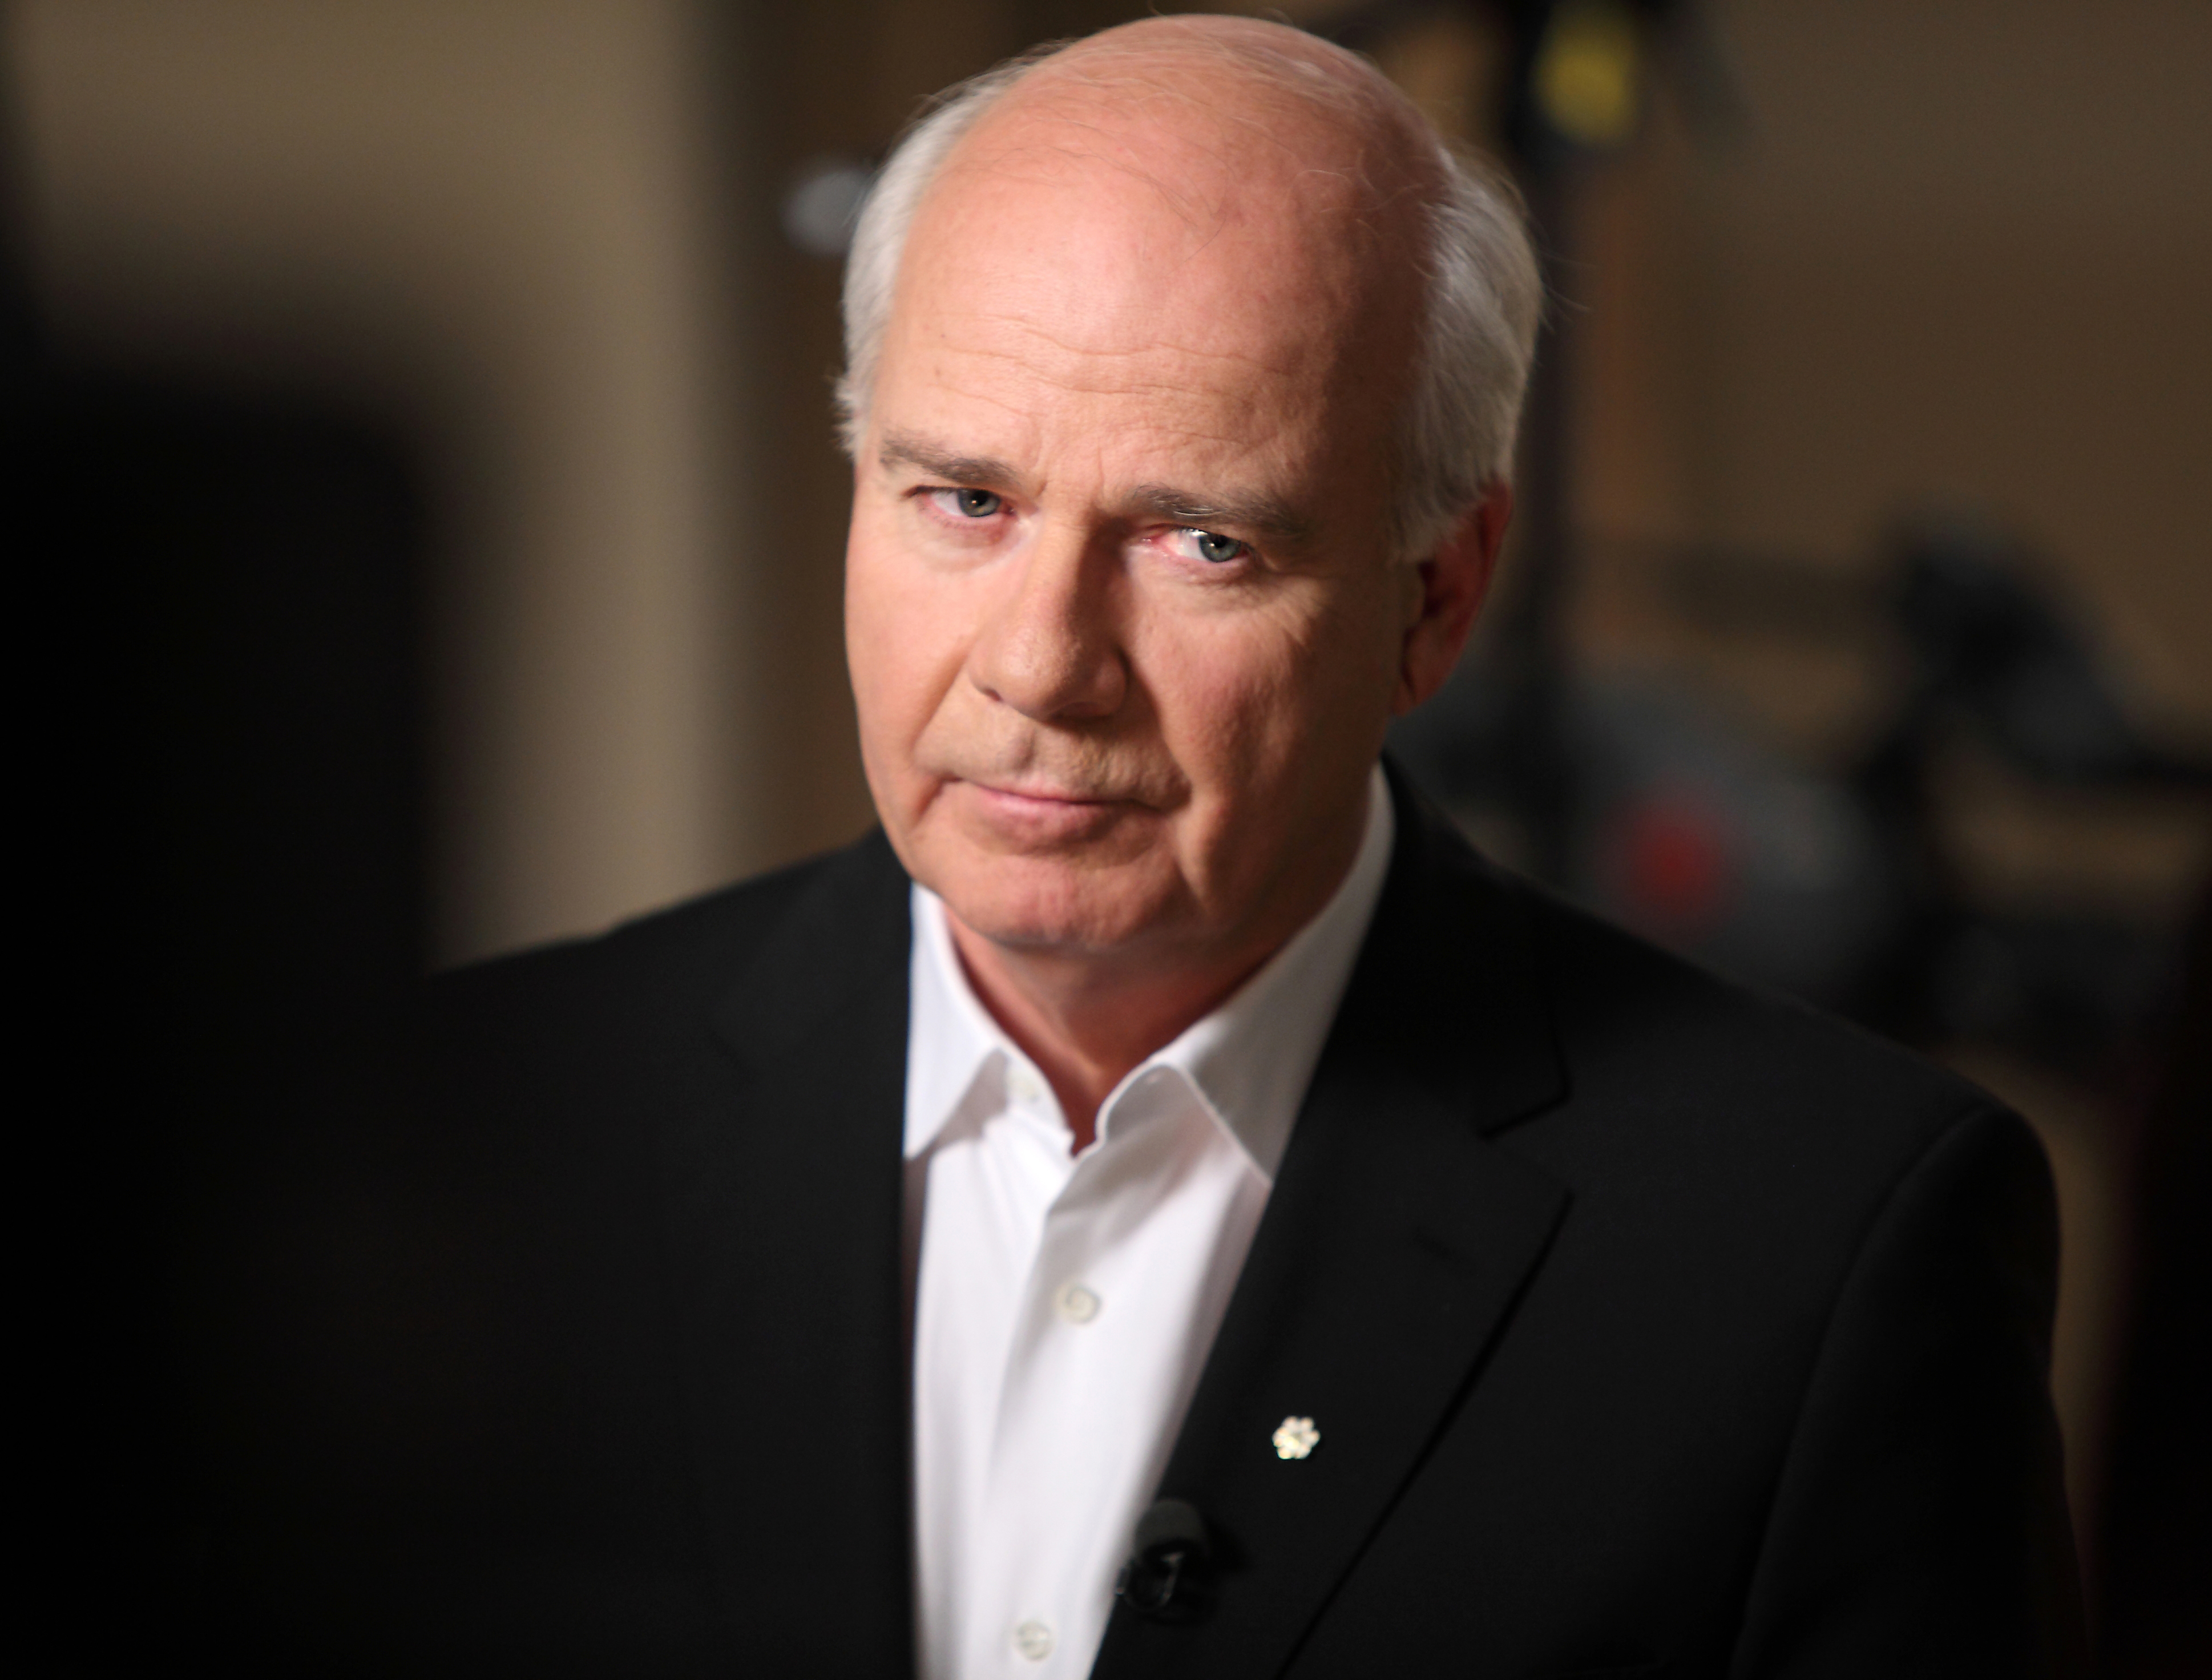 Peter Mansbridge is one of Canada’s most respected journalists. He is the former chief correspondent for CBC News; anchor of The National, CBC’s flagship nightly newscast where he worked for thirty years reporting on national and international news stories; and host of Mansbridge One on One. He has received over a dozen national awards for broadcast excellence, including a lifetime achievement award from the Academy of Canadian Cinema & Television. He is a distinguished fellow of the Munk School of Global Affairs & Public Policy at the University of Toronto and the former two-term Chancellor of Mount Allison University. In 2008, he was made an Officer of the Order of Canada—the country’s highest civilian honour—and in 2012 he was awarded the Queen Elizabeth II Diamond Jubilee Medal. He is the author of the instant #1 national bestsellers Off the Record and Extraordinary Canadians, and also the national bestseller Peter Mansbridge One on One: Favourite Conversations and the Stories Behind Them. He lives in Stratford, Ontario. Follow him on Twitter @PeterMansbridge, visit him at ThePeterMansbridge.com, or listen to his daily podcast, The Bridge, with Sirius XM Canada.
